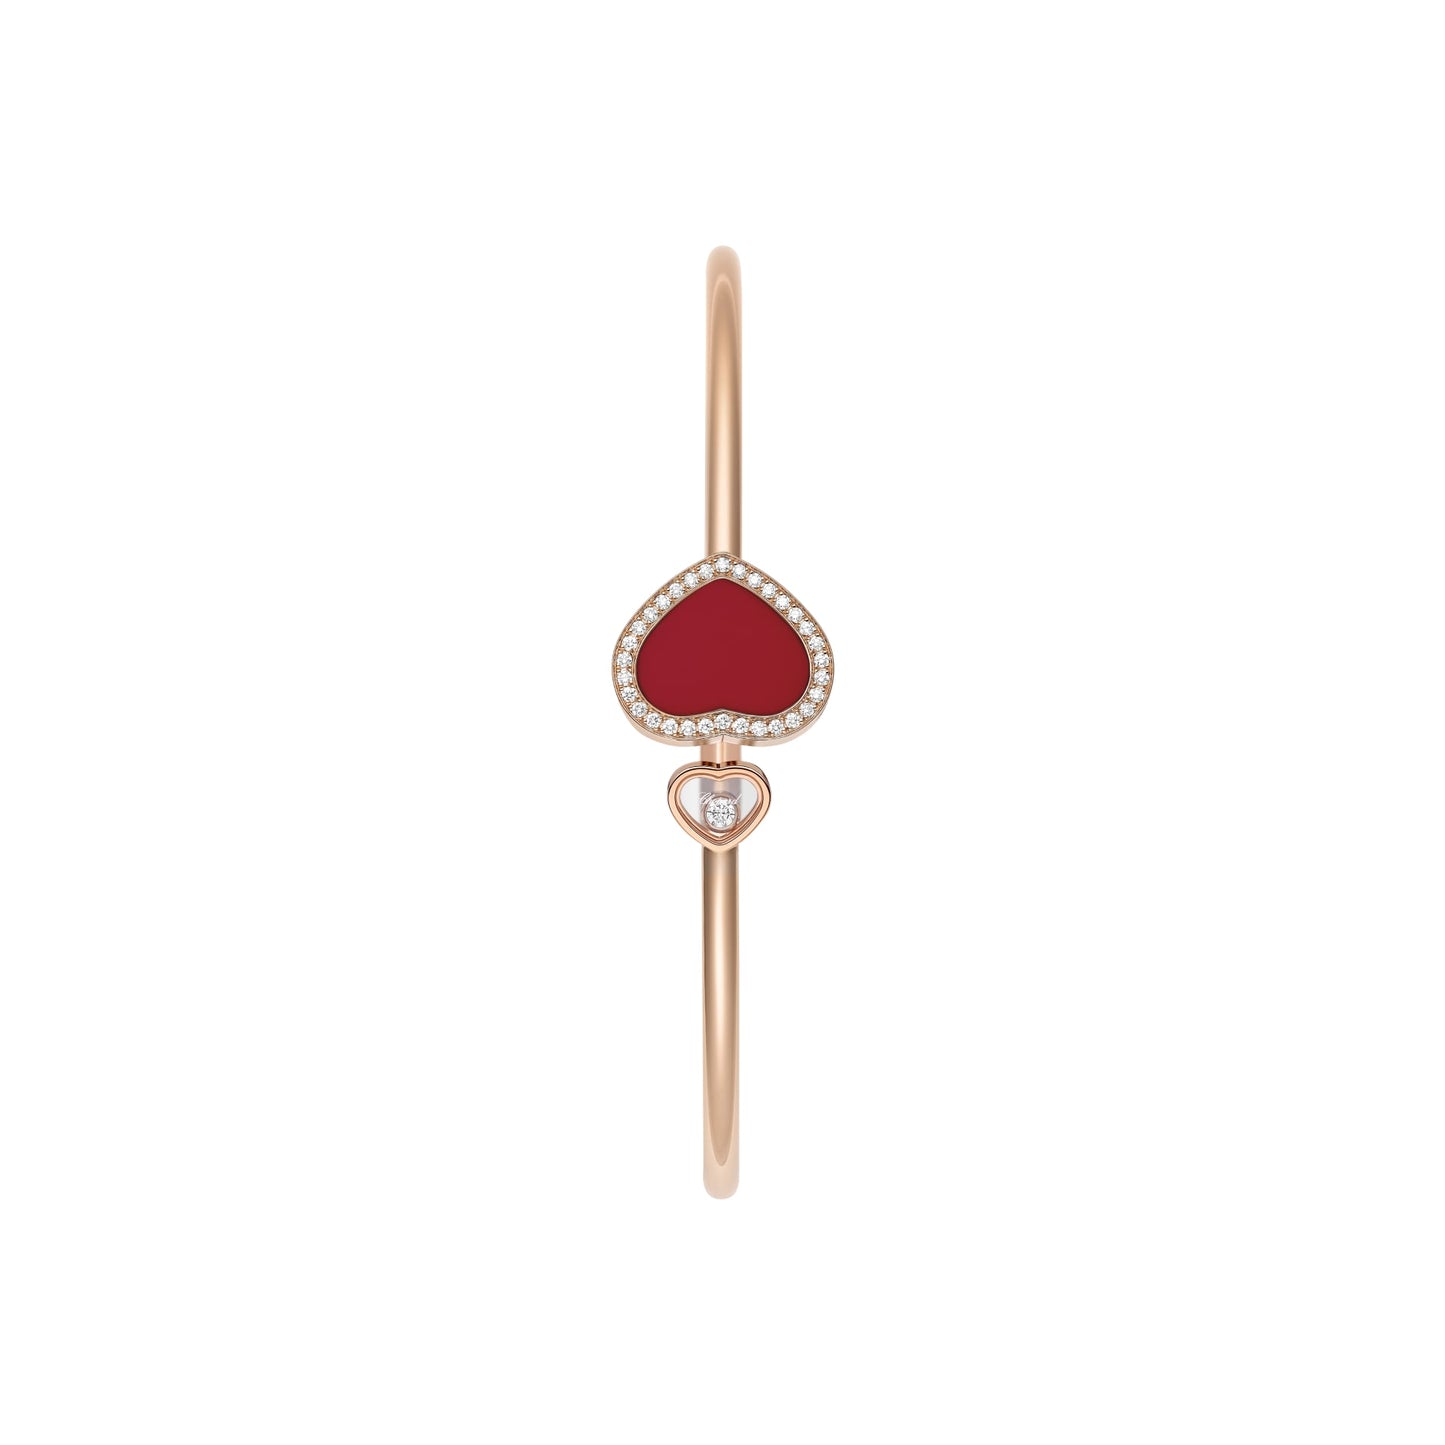 HAPPY HEARTS BANGLE, ETHICAL ROSE GOLD, DIAMONDS, RED STONE 85A074-5800